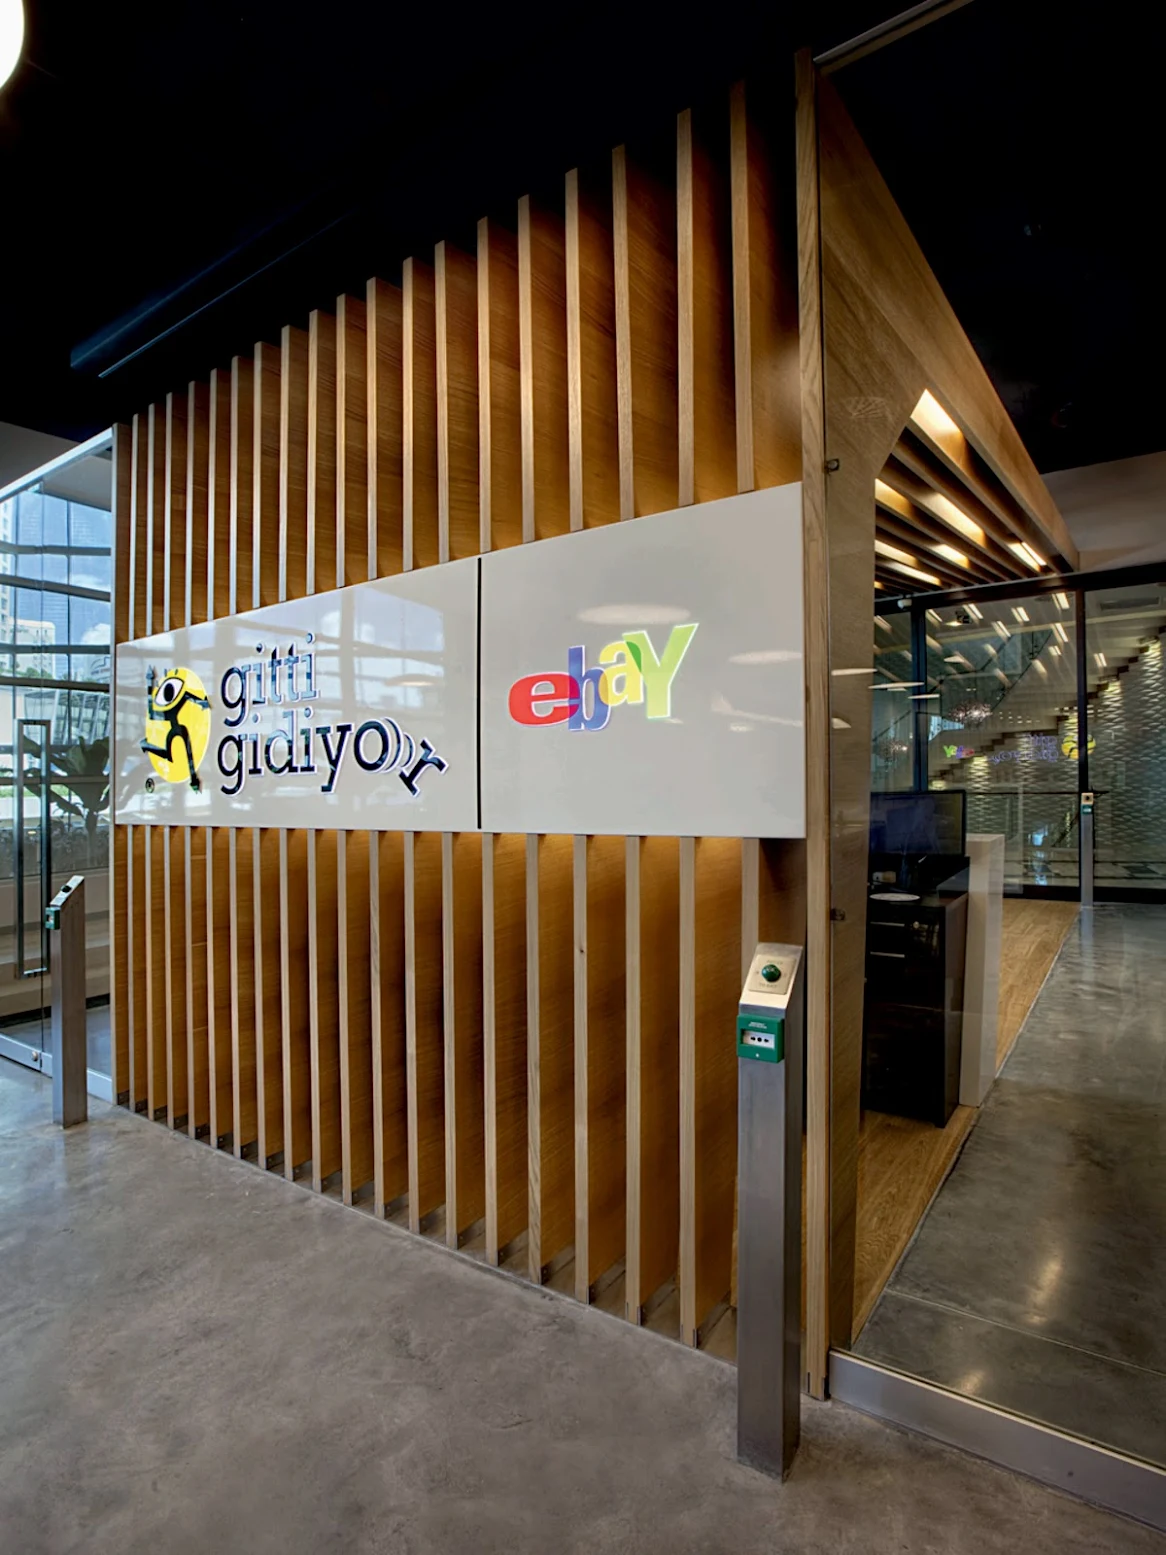 Ebay By Oso Architecture